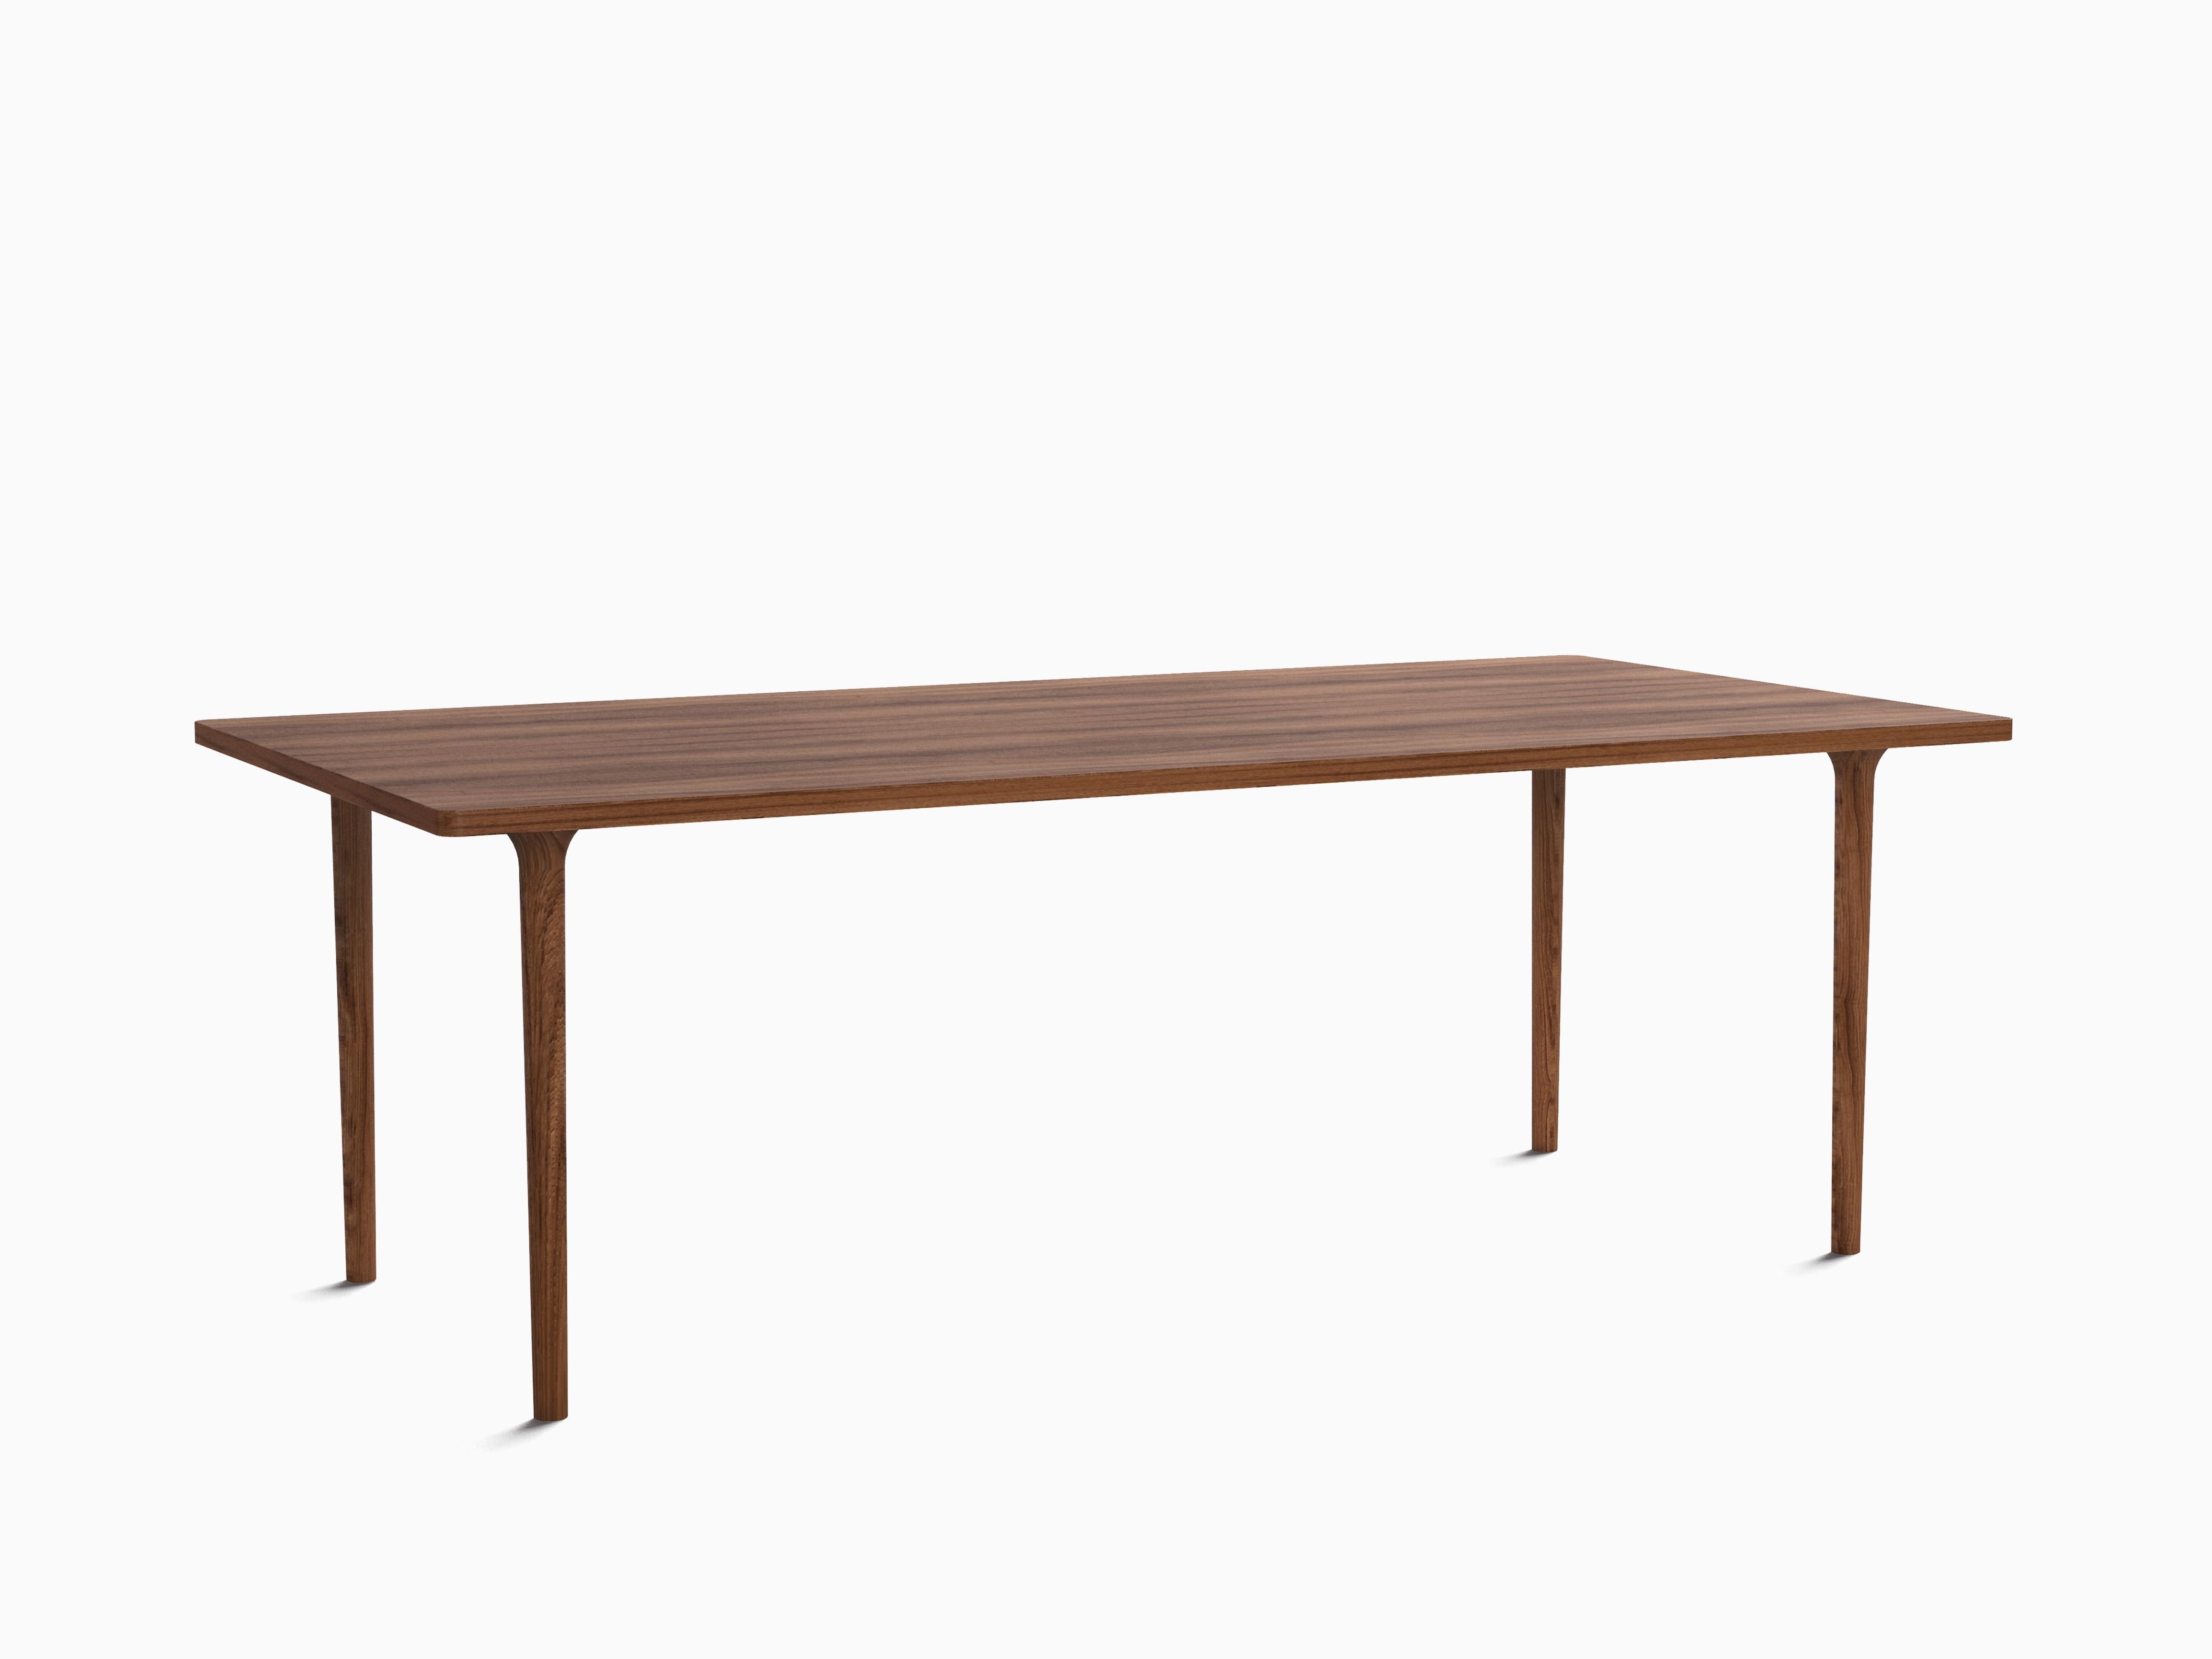 CAST table - A simple and versatile design that can be used with different table tops shapes and sizes – be it round, oval, rectangular or square. It is ideal for a wide range of uses be it at the home, also in an extendible version or at an office